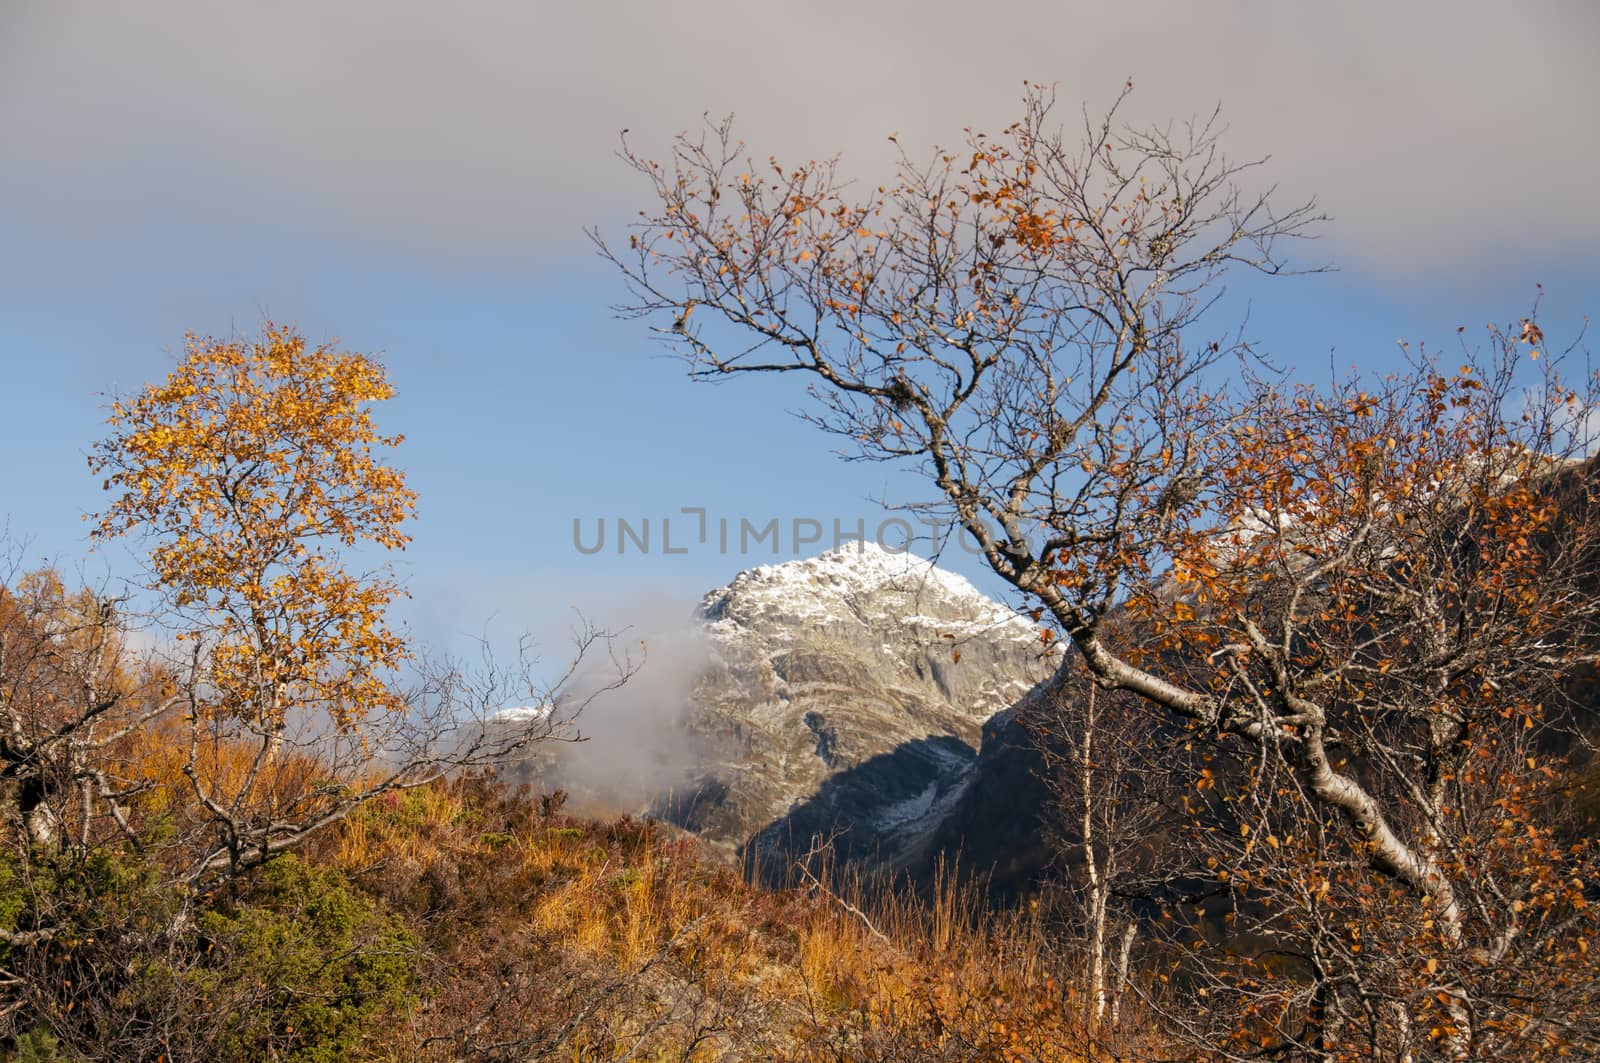 A mountain peak covered in first snow in autumn